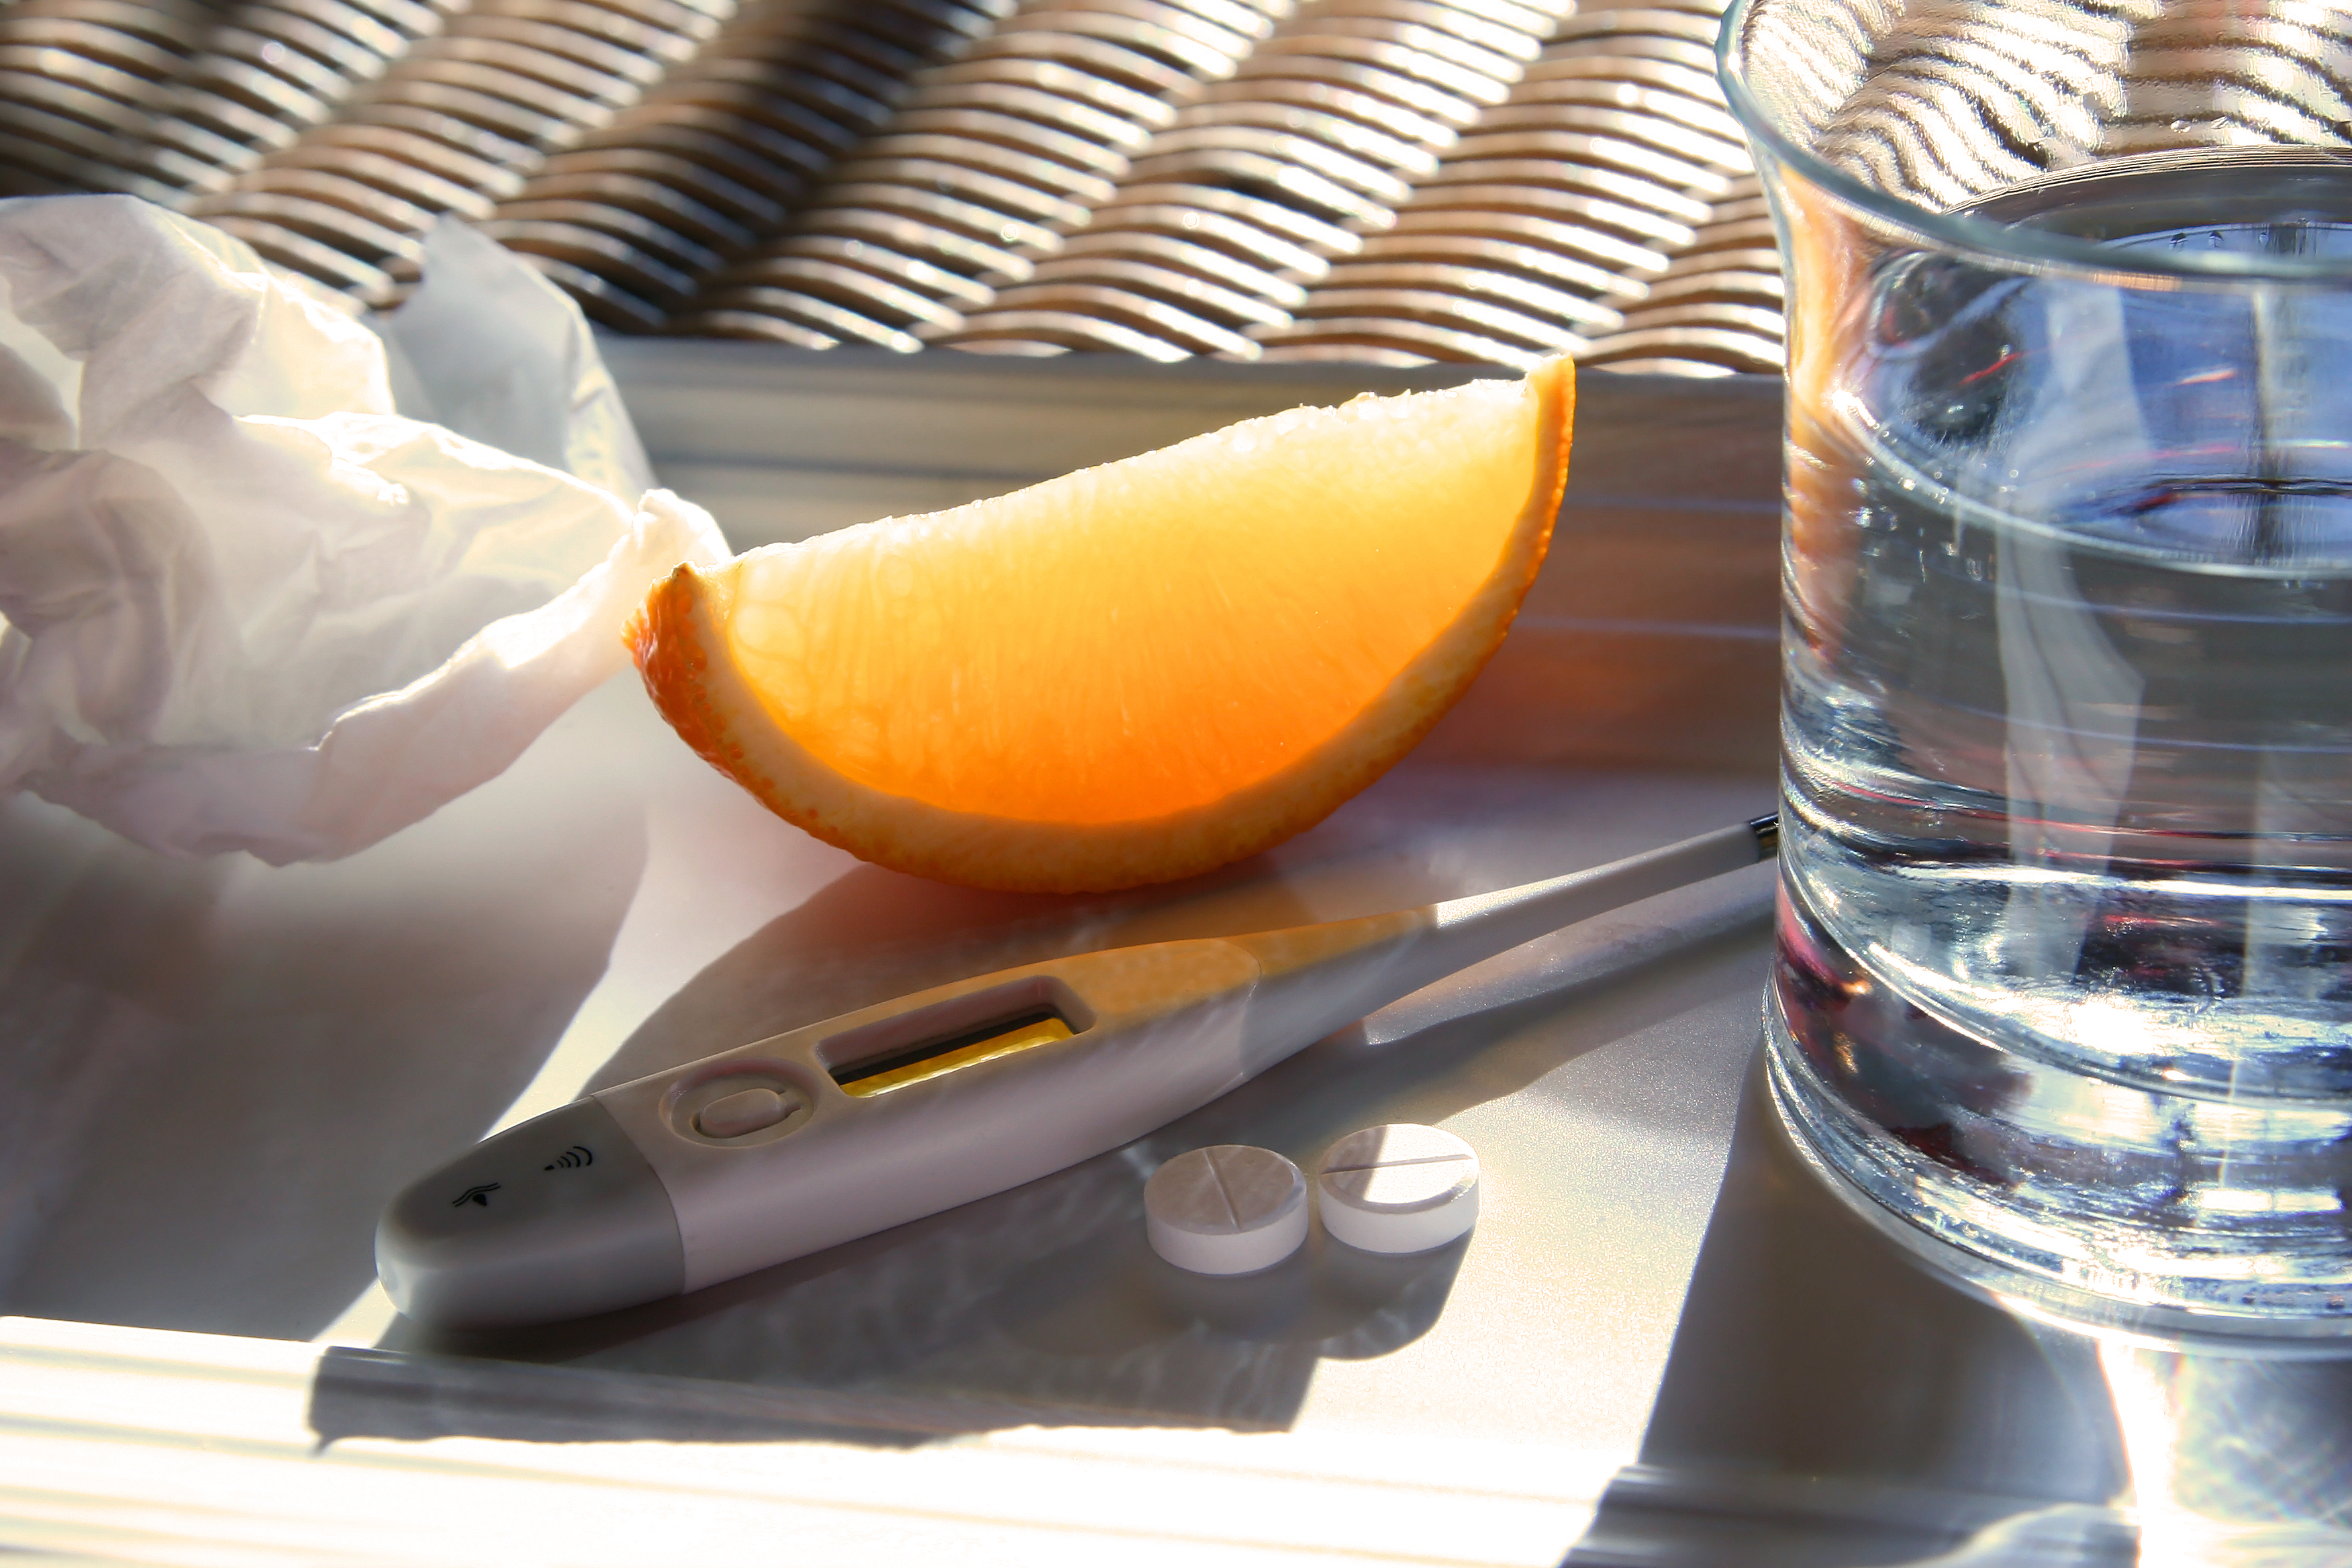 Tissue, orange wedge,water glass, thermometer and cold pills for relief of flu symptoms